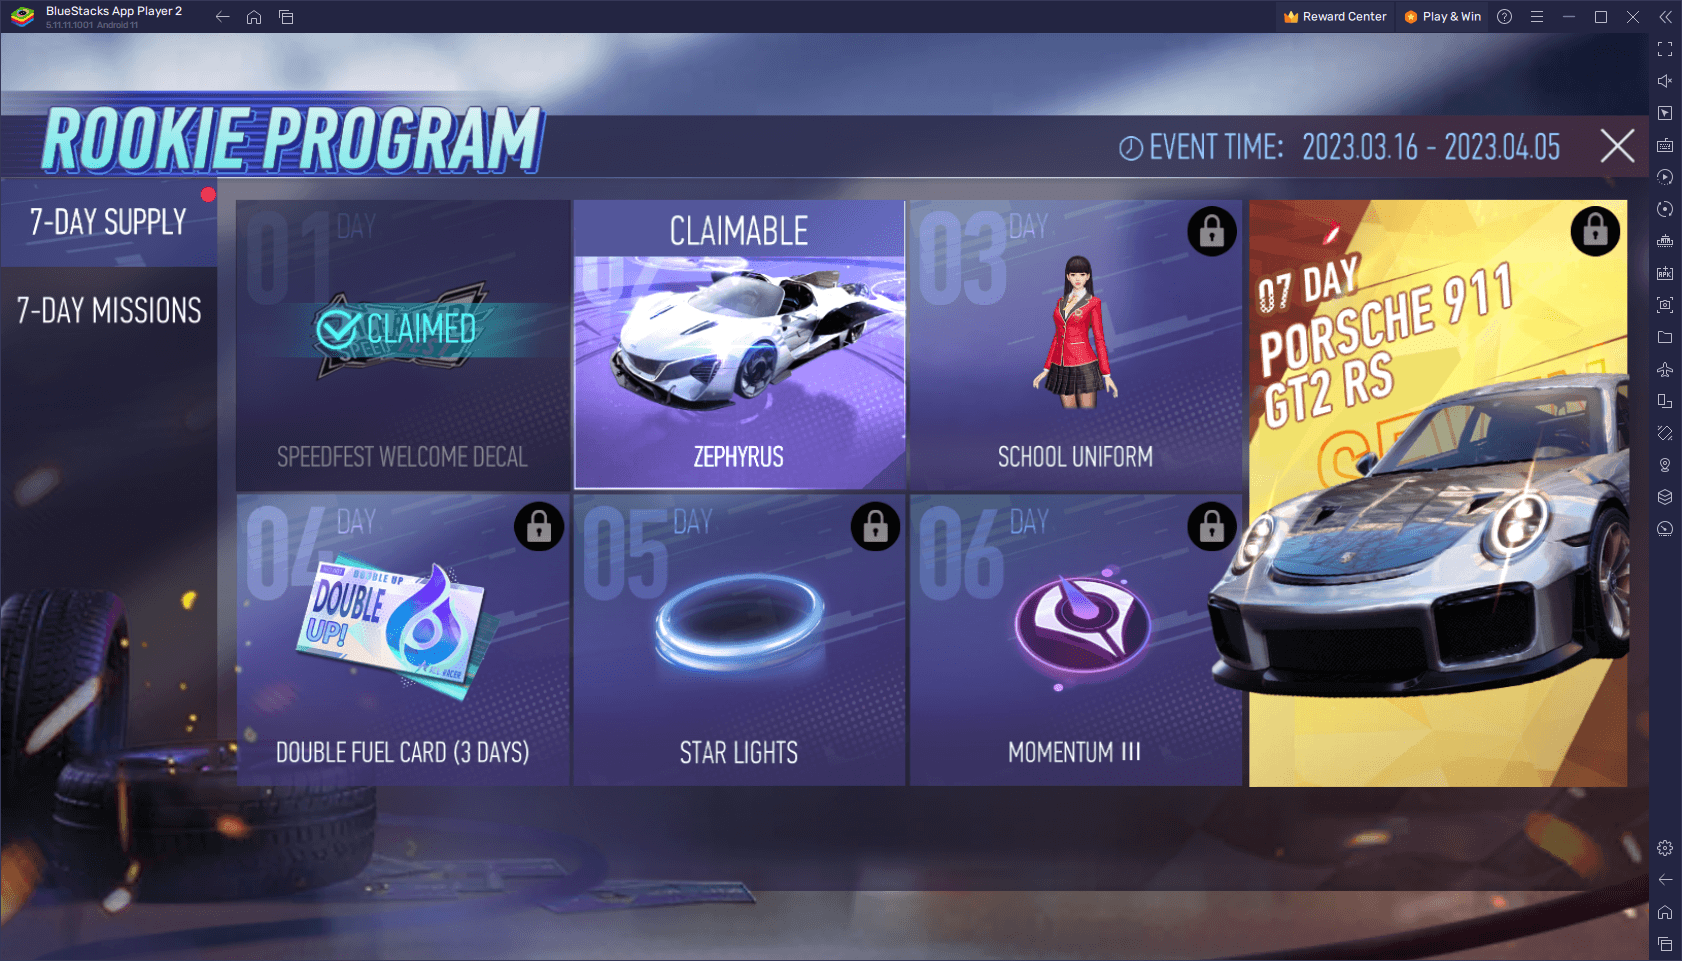 Vehicle Upgrade and Customization Guide to Ace Racer